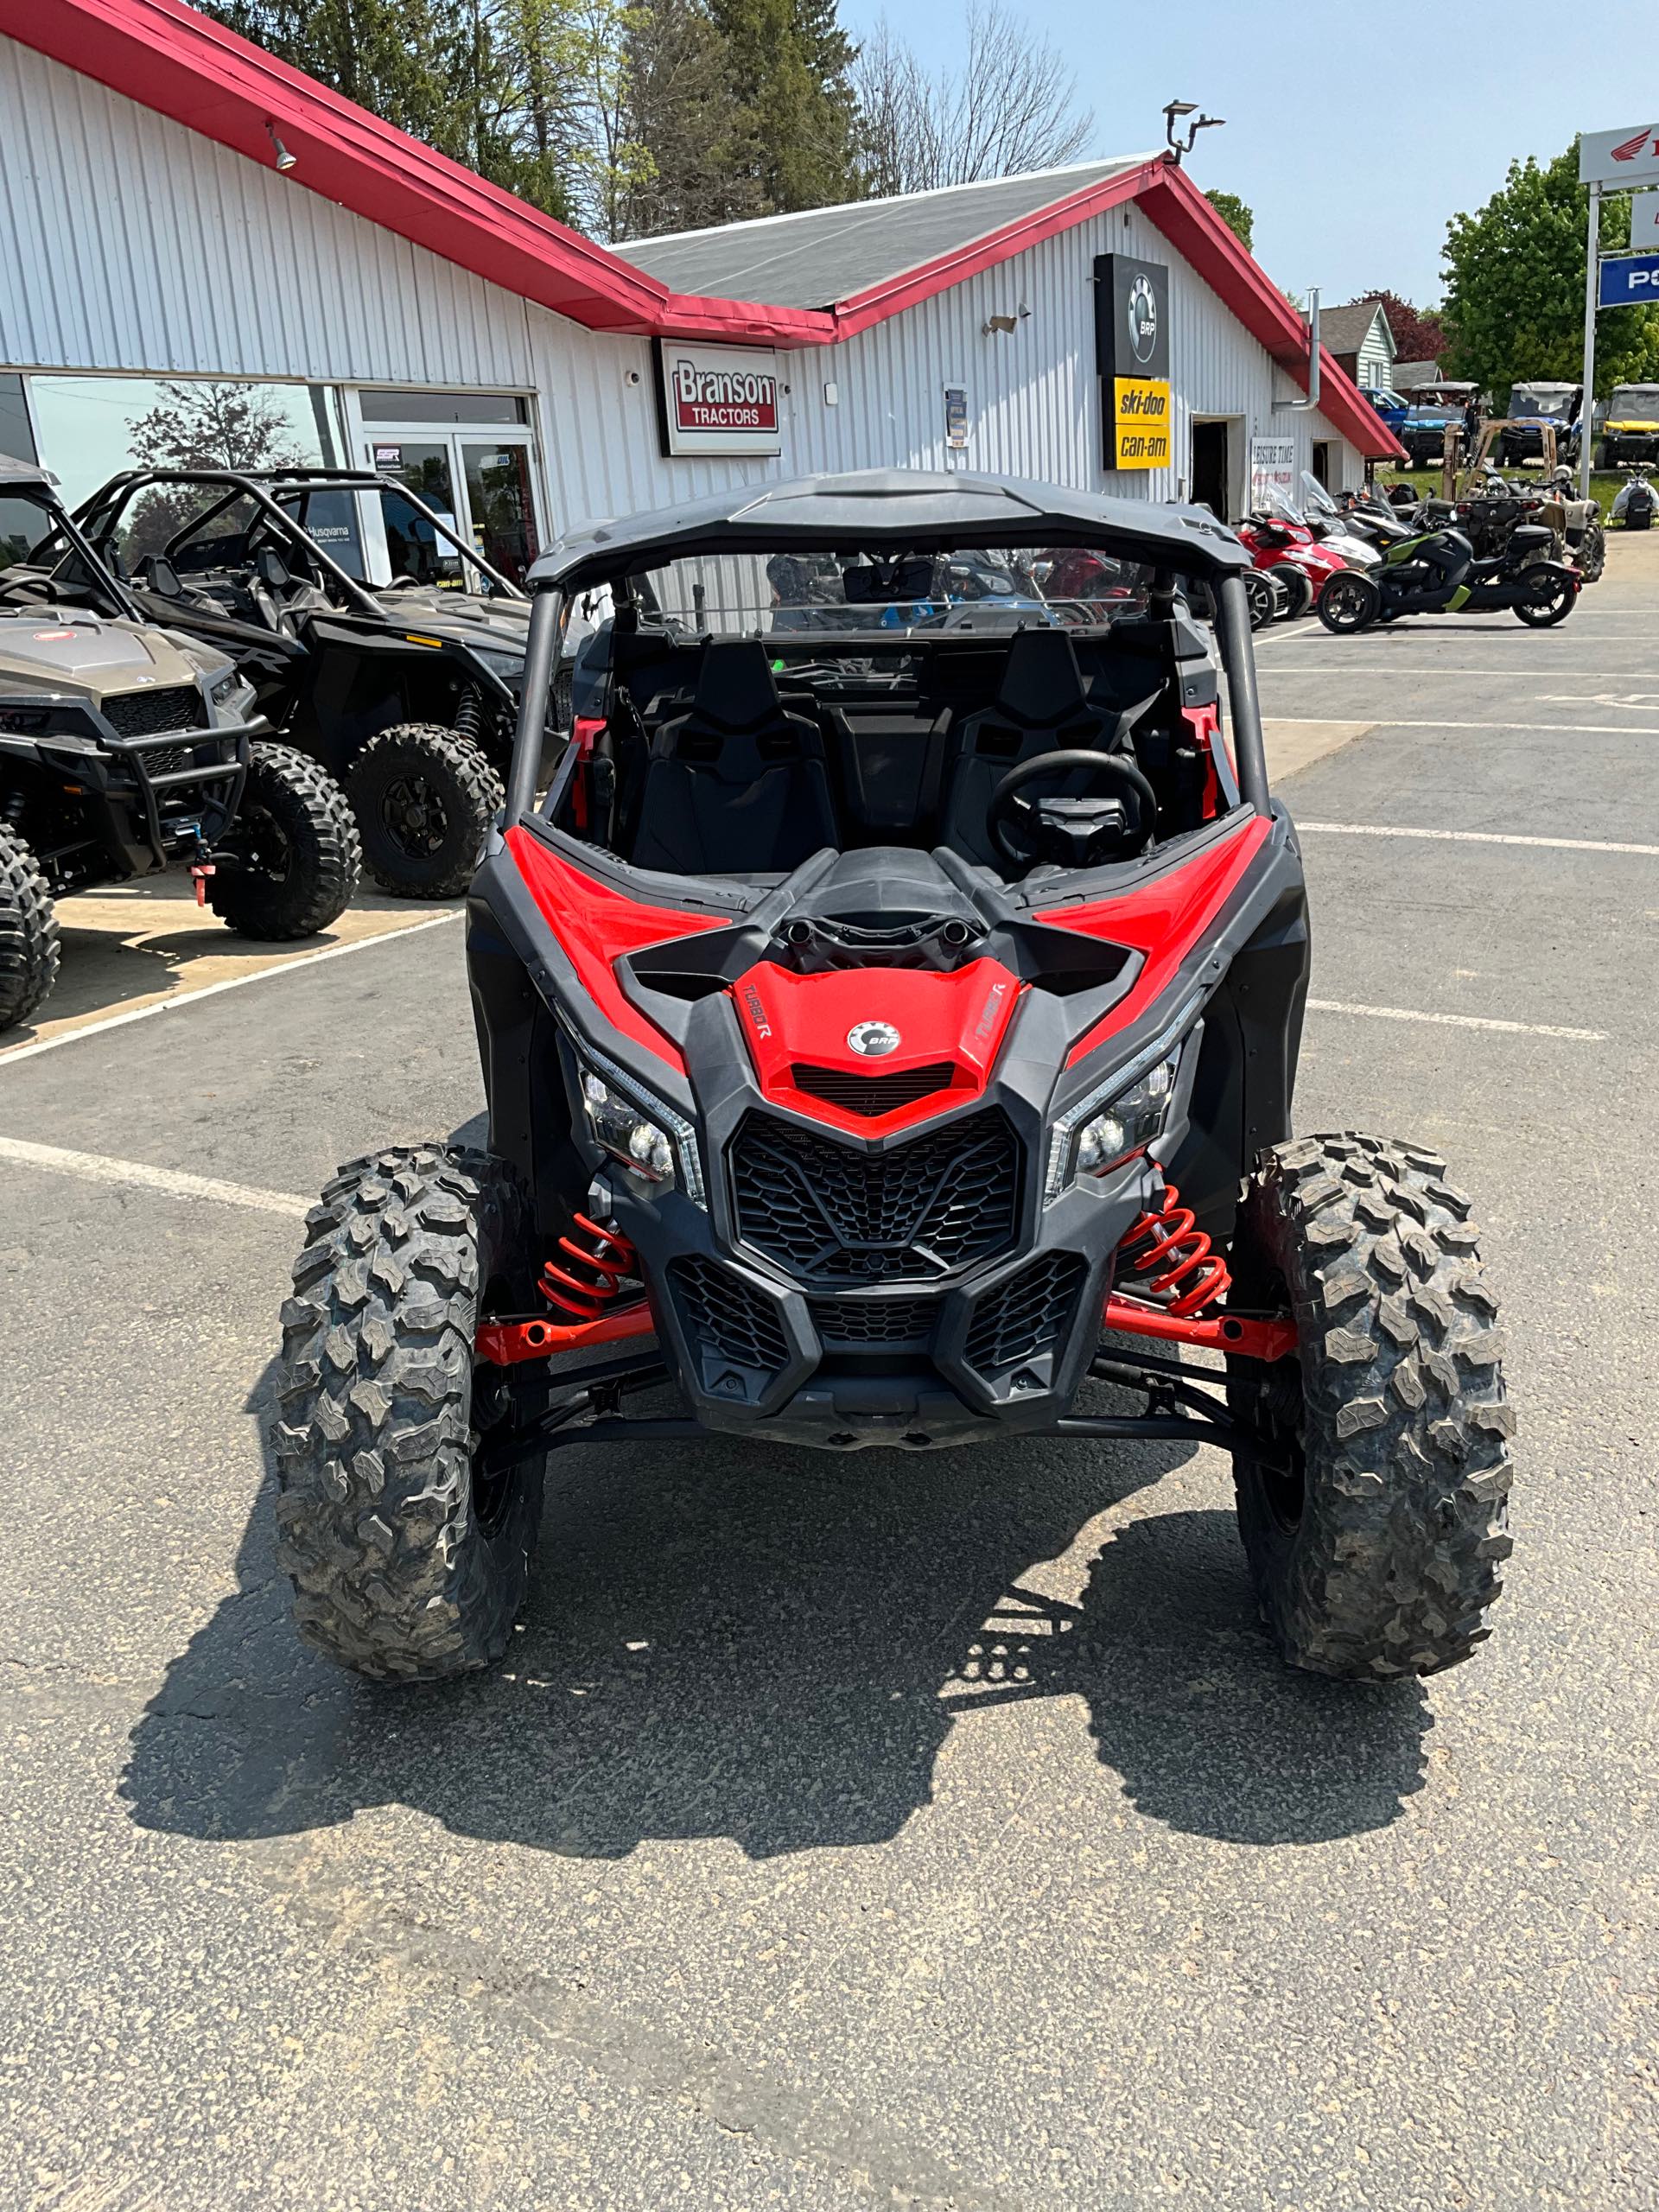 2021 Can-Am Maverick X3 DS TURBO R at Leisure Time Powersports of Corry